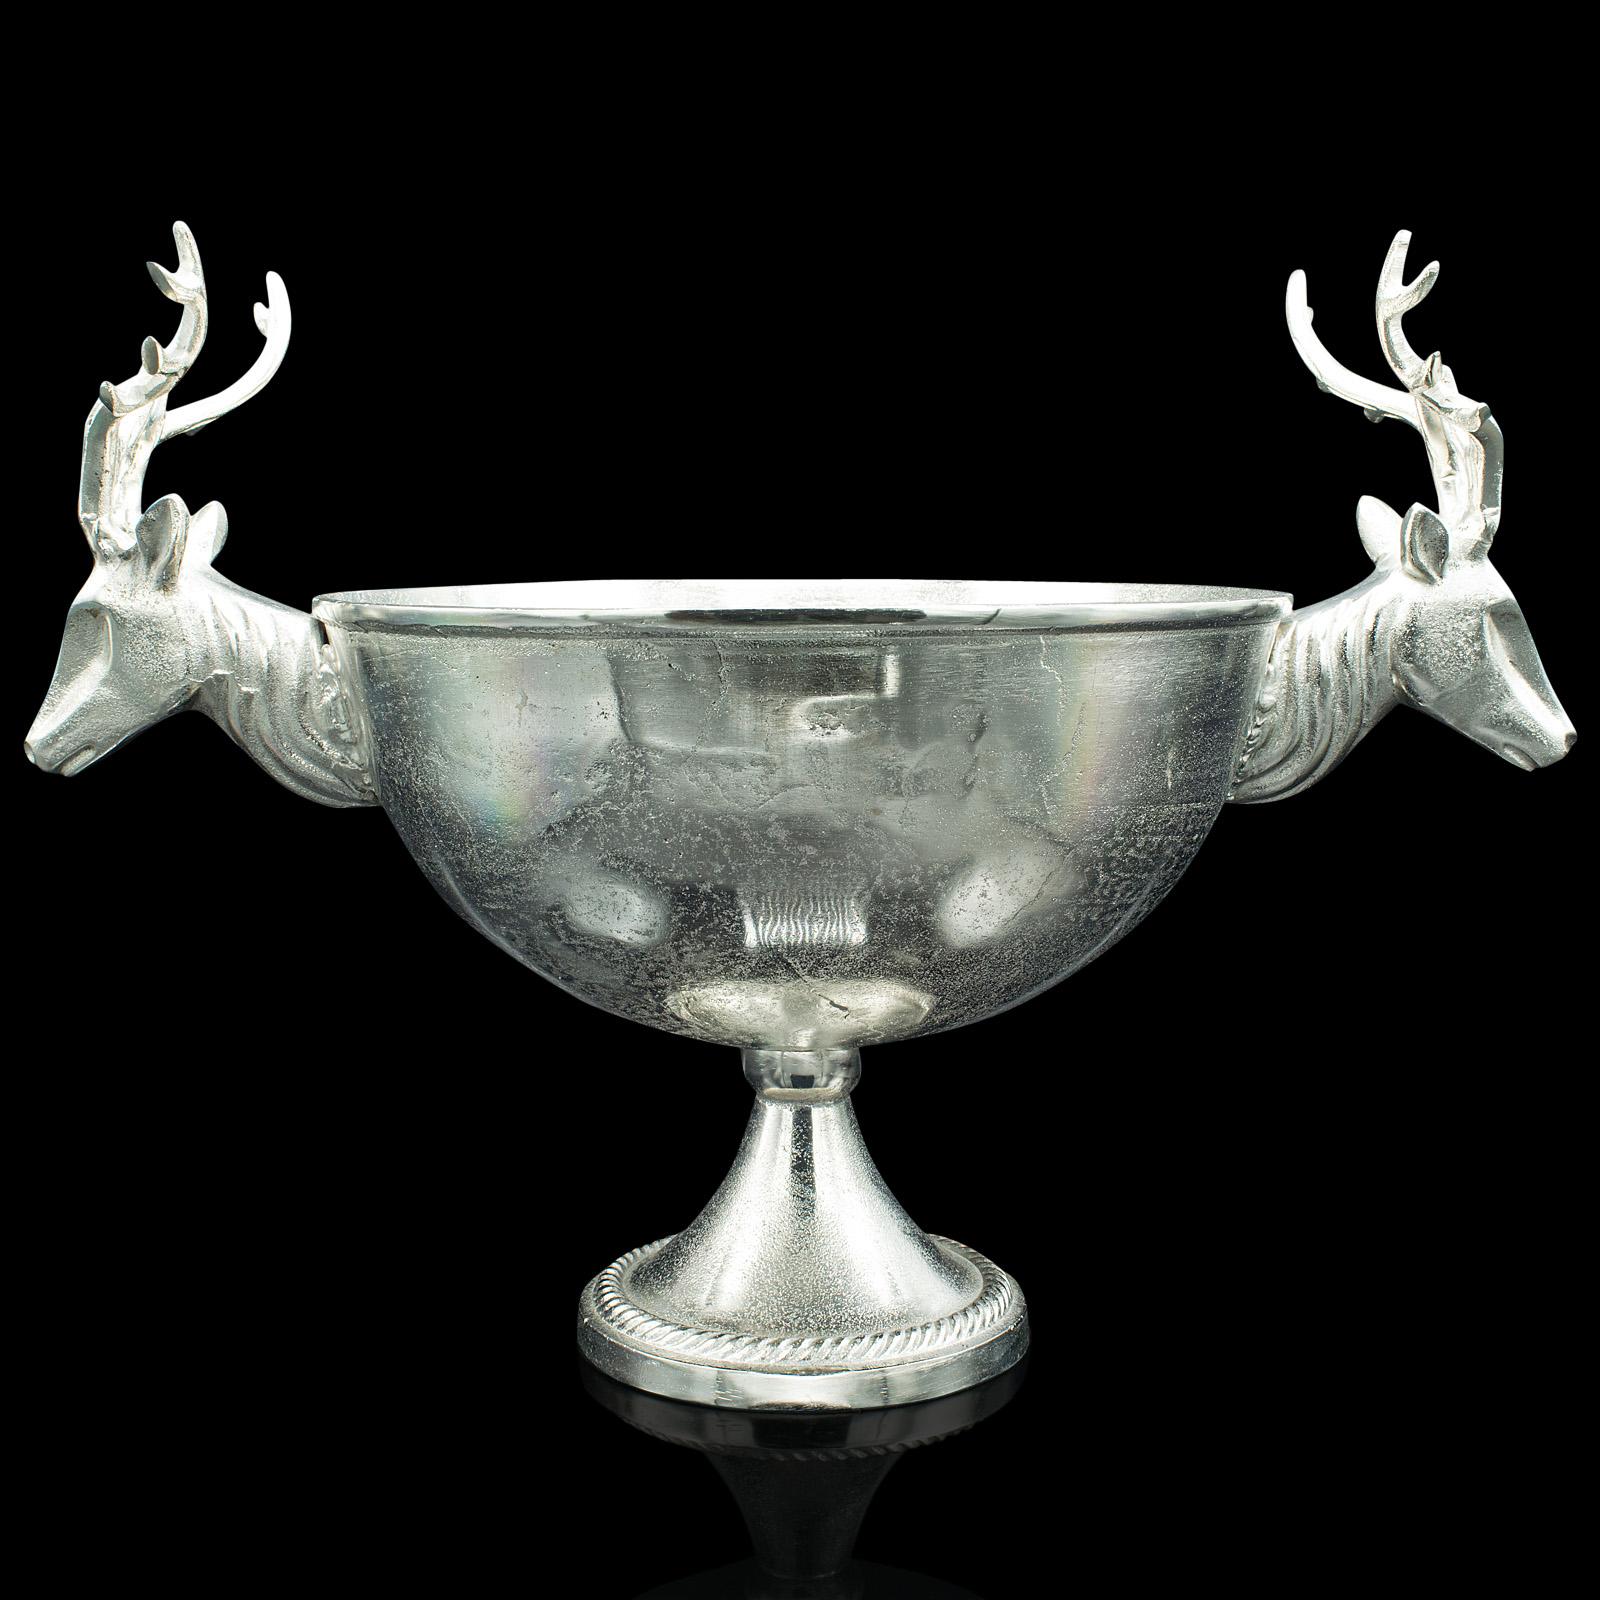 This is a large vintage decorative wine cooler. A Continental, white metal bottle holder or fruit bowl with striking stag head handles, dating to the late 20th century, circa 1980.

A striking centrepiece ideal for drinks parties or table